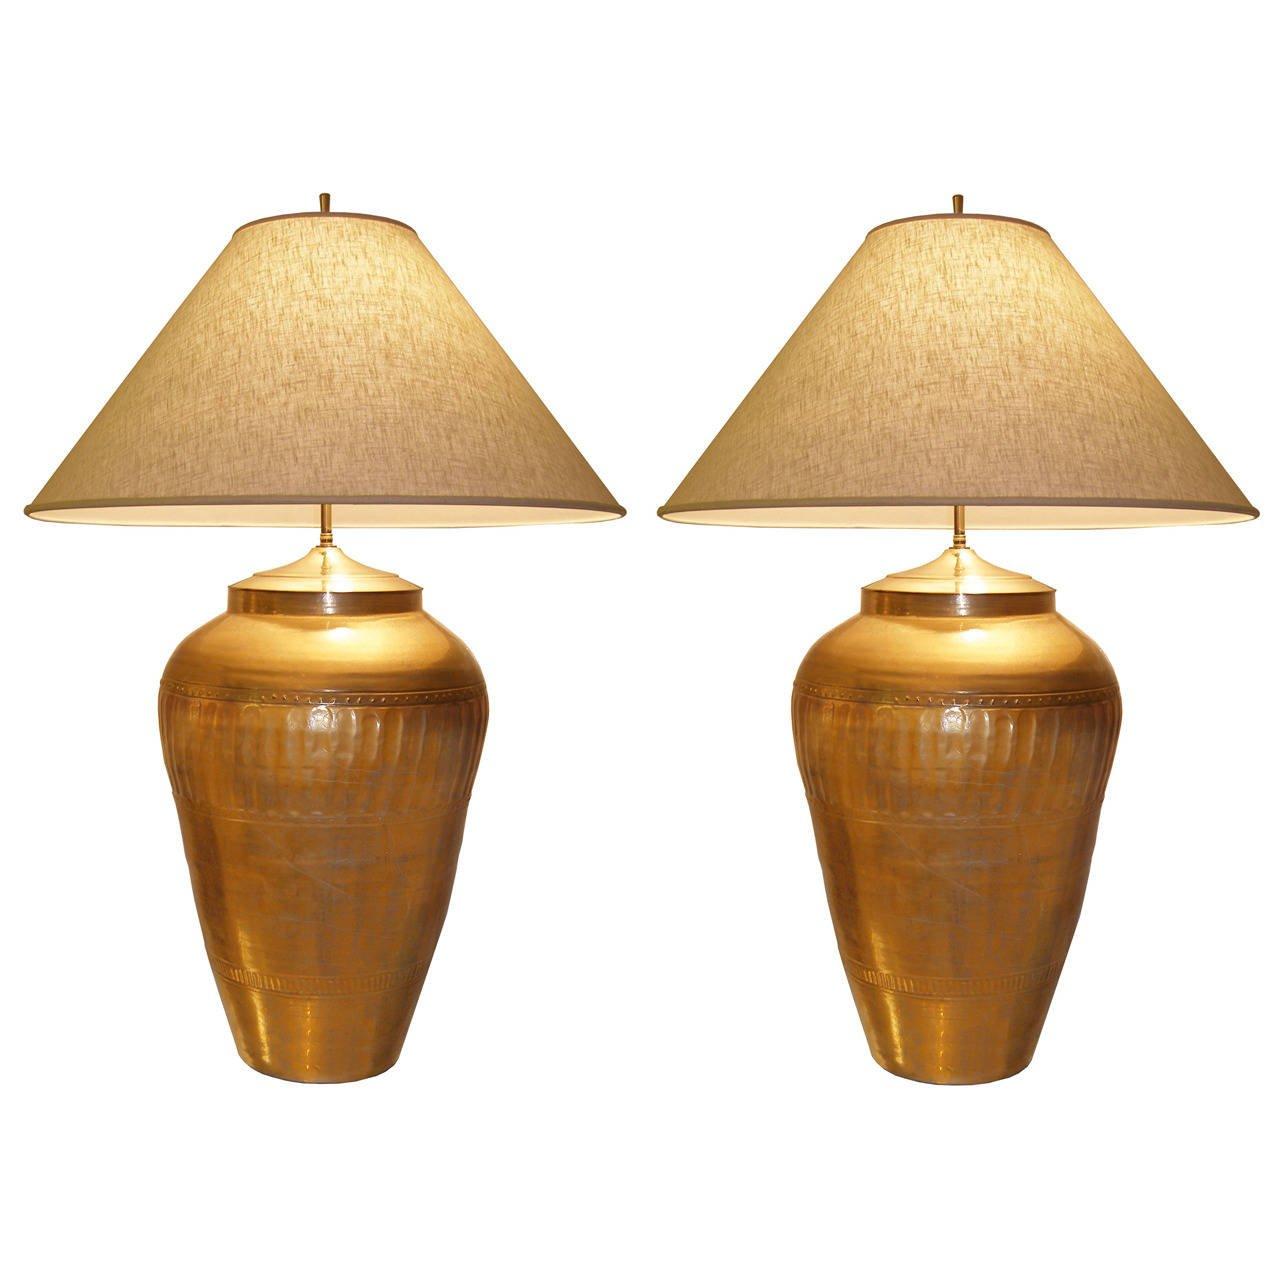 Pair of Large Italian Ceramic Metallic Gold Lamps with Light Craquelure Finish In Excellent Condition For Sale In New York, NY